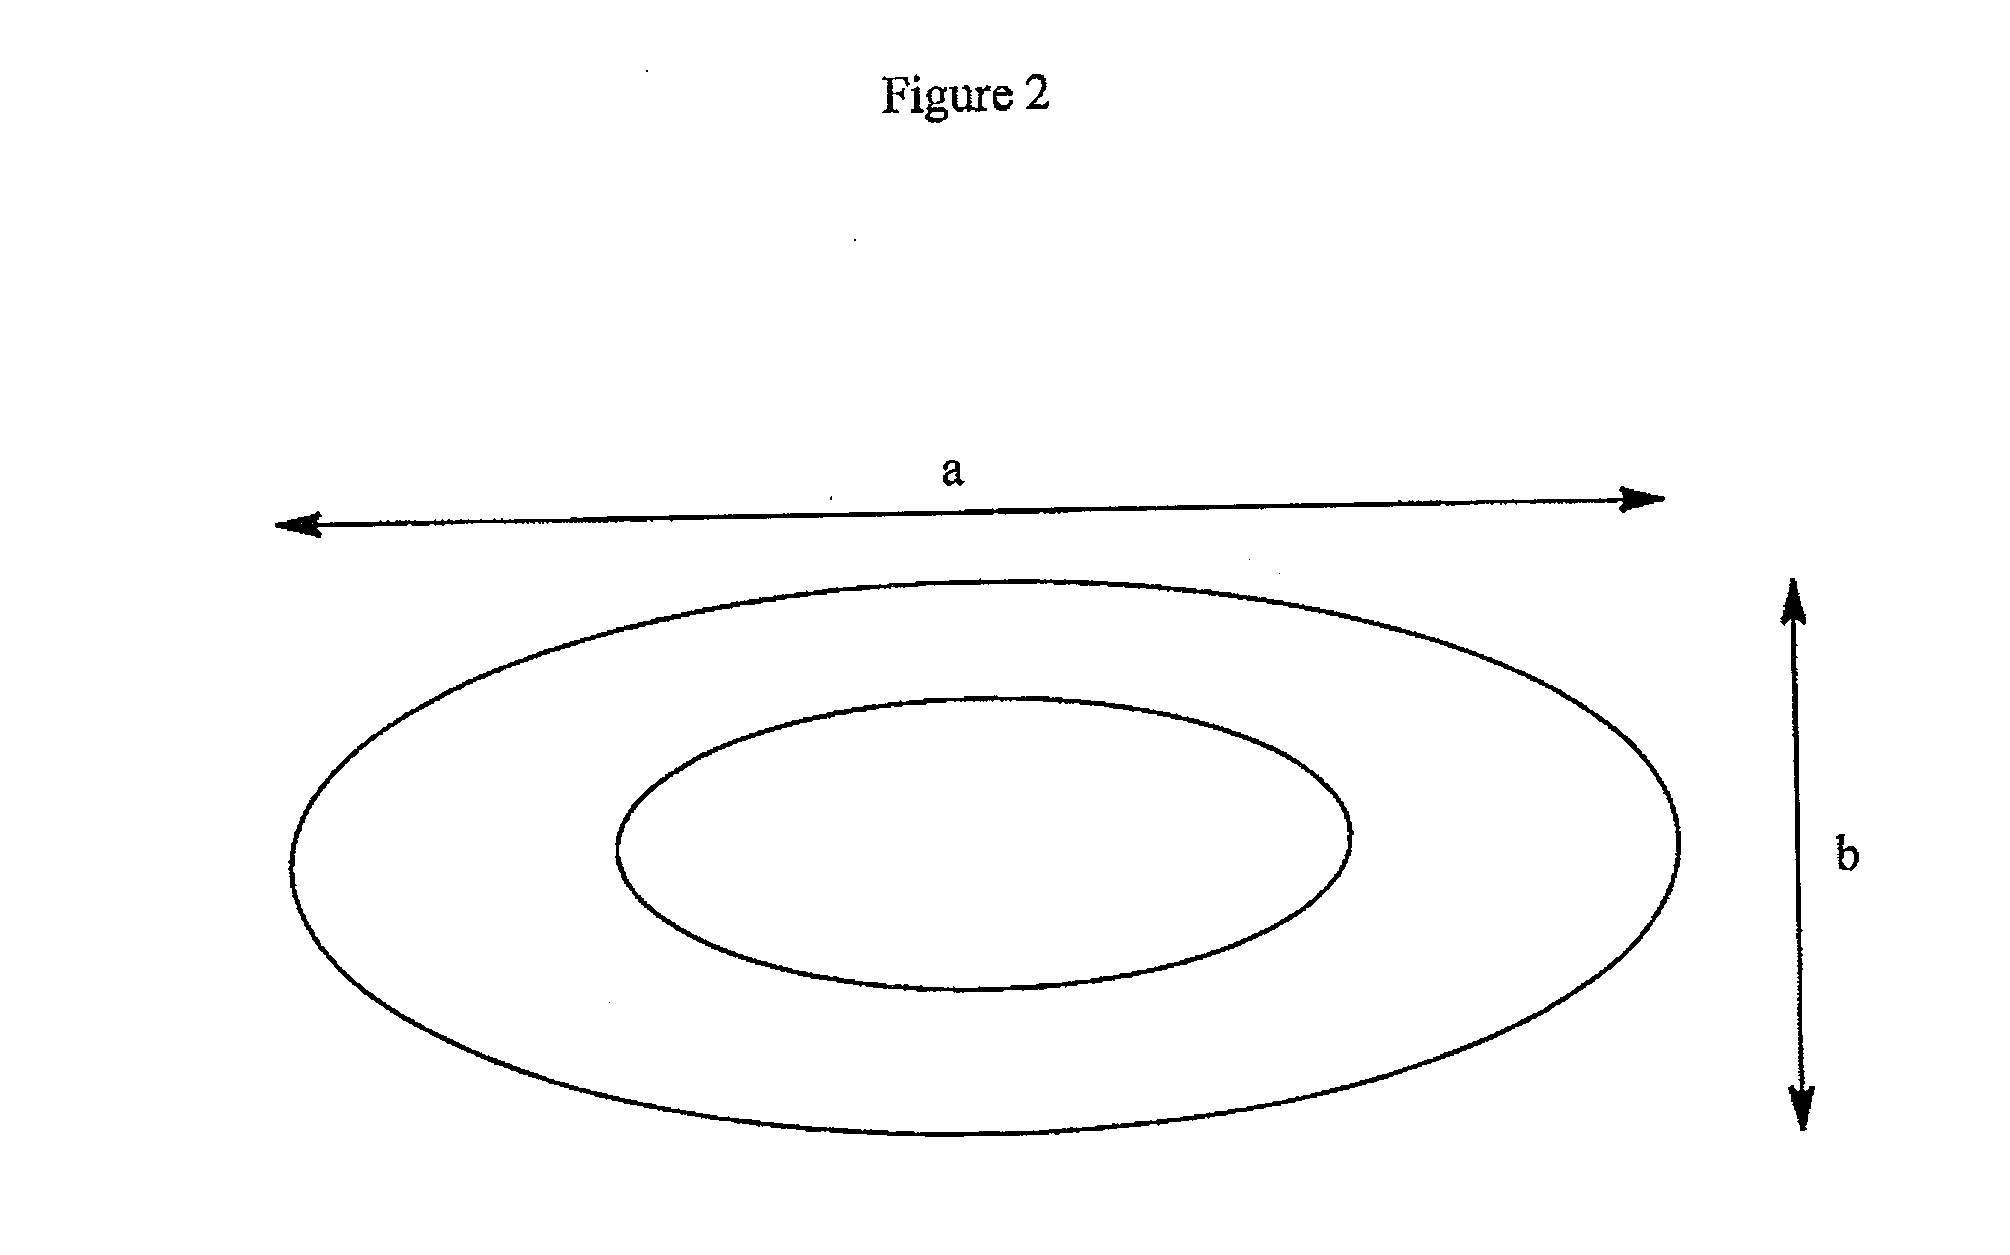 Inkjet recording ink, process for producing the inkjet recording ink, inkjet cartridge, inkjet recording apparatus, and inkjet recorded image